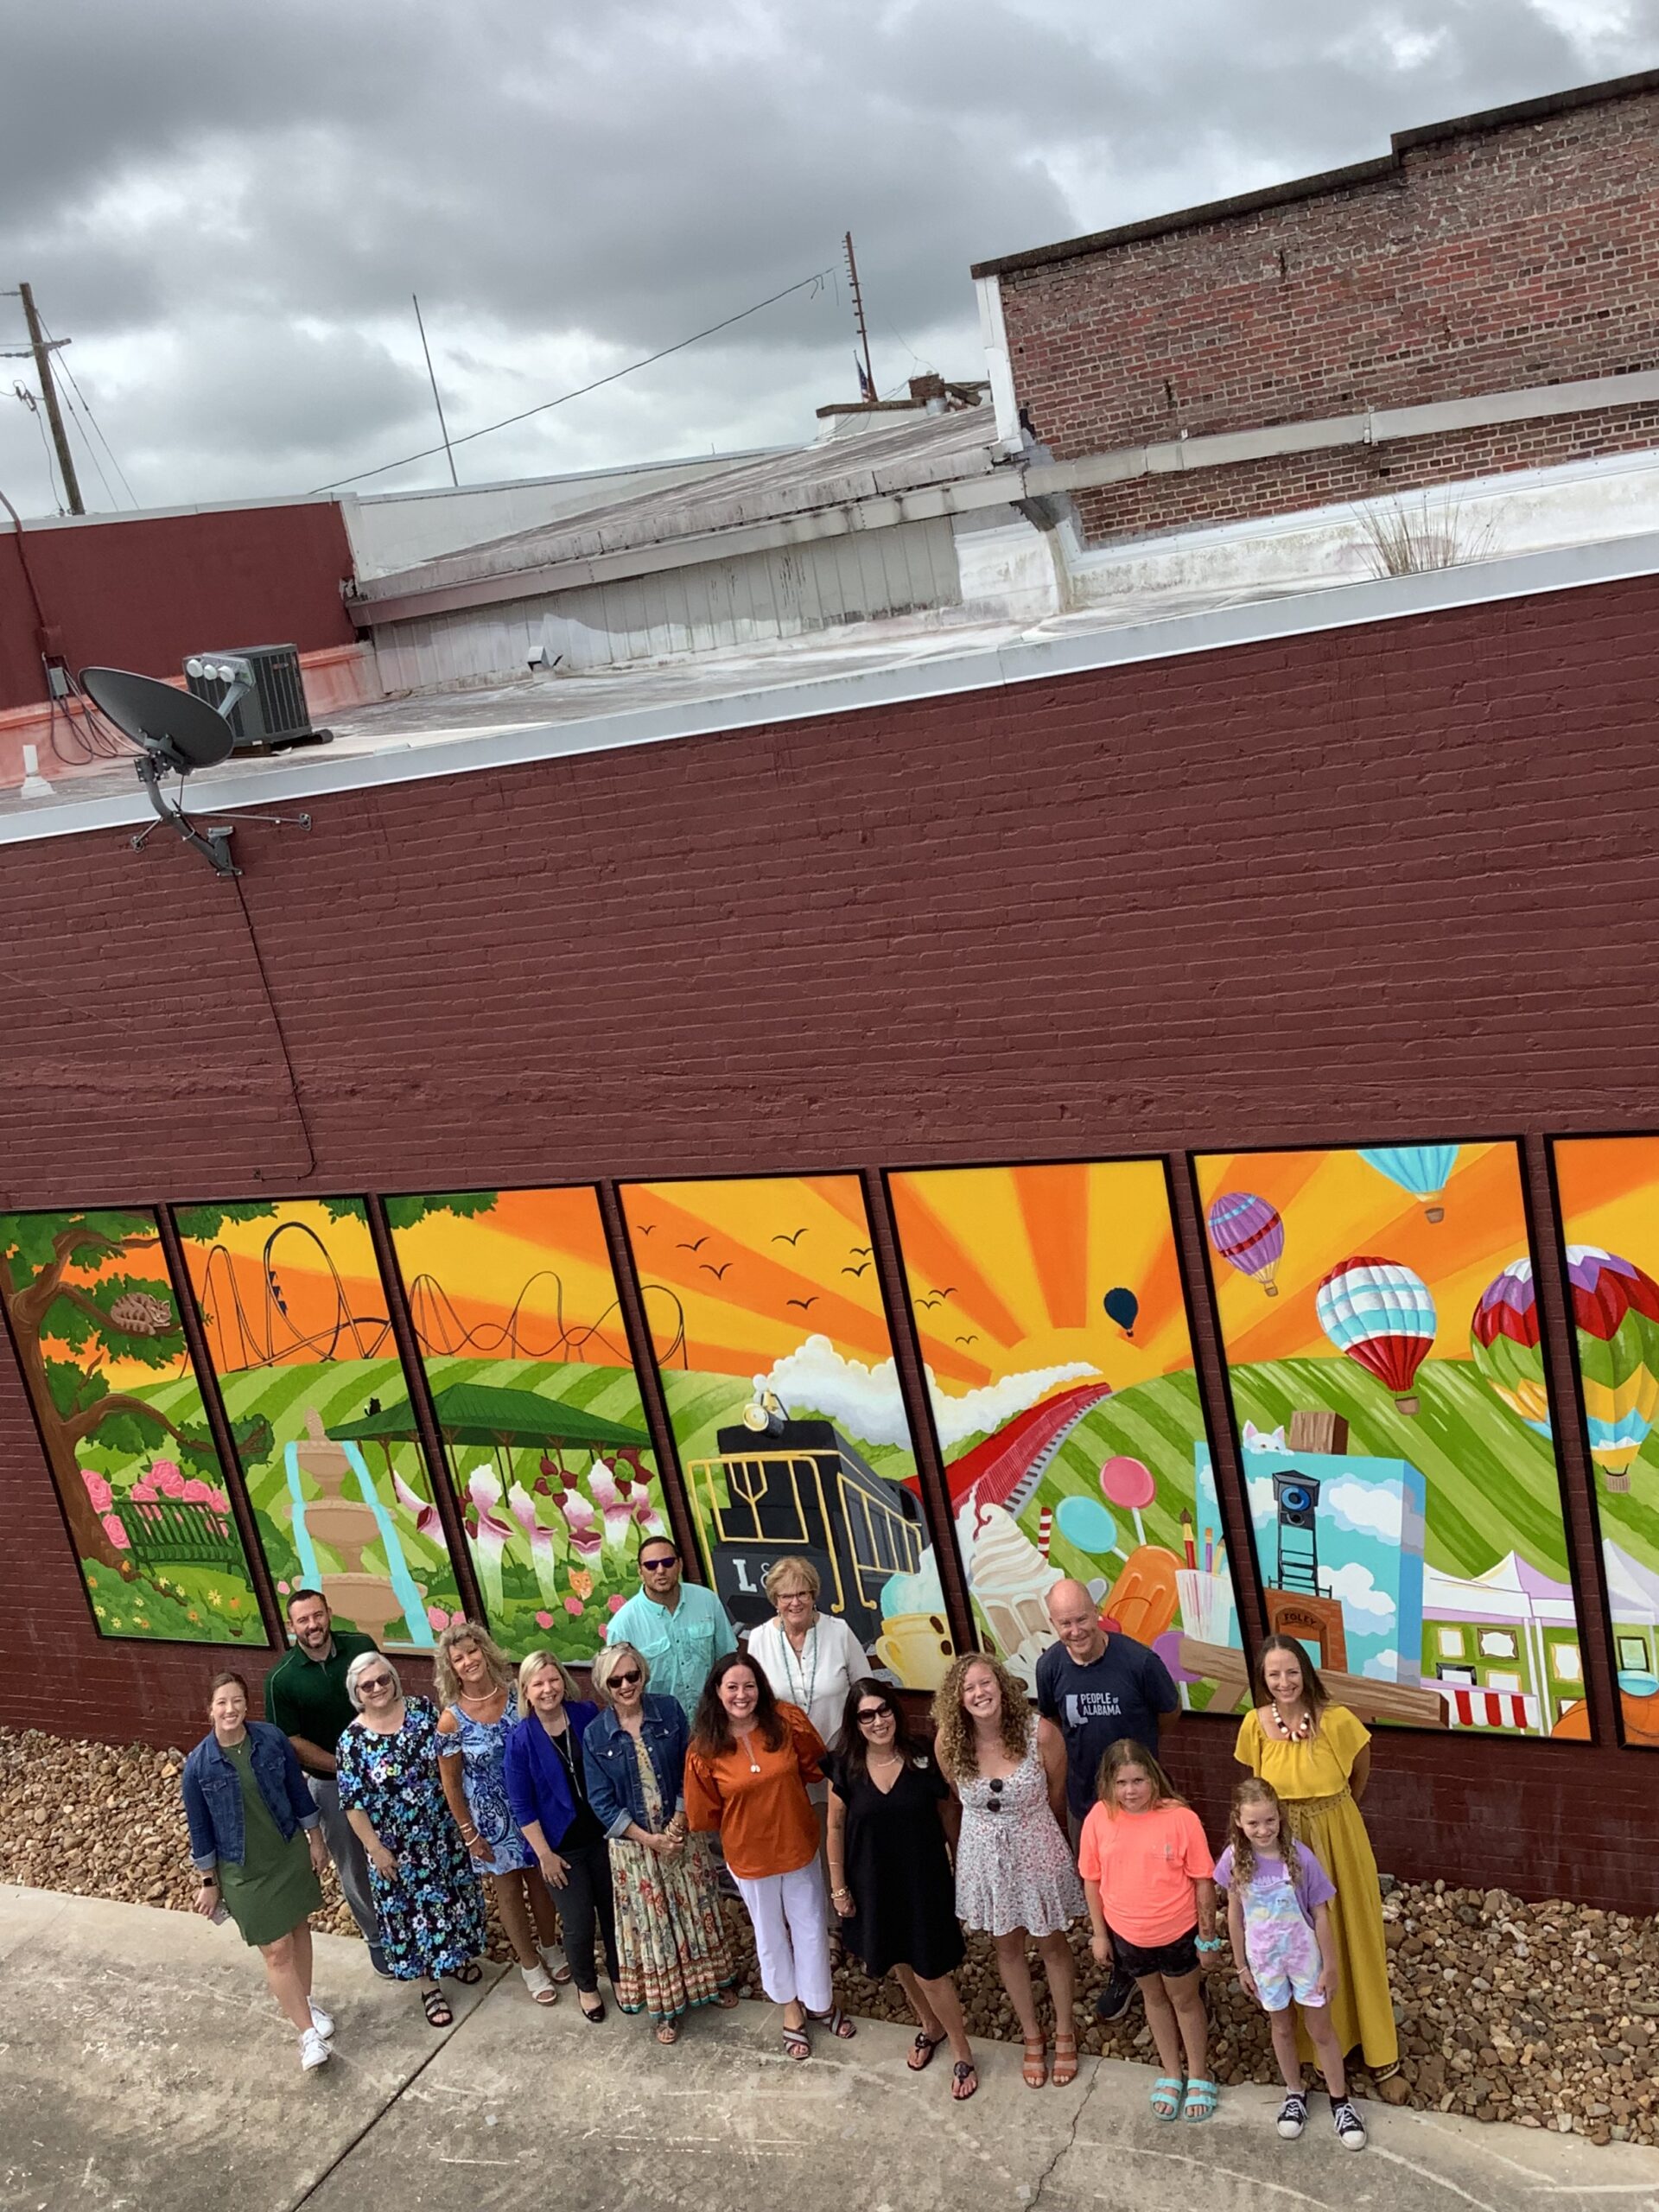 Representatives from the Foley Main Street Board, the City of Foley, the Foley Art Center, the high school, and some of the young artists joined artist Hannah Legg.